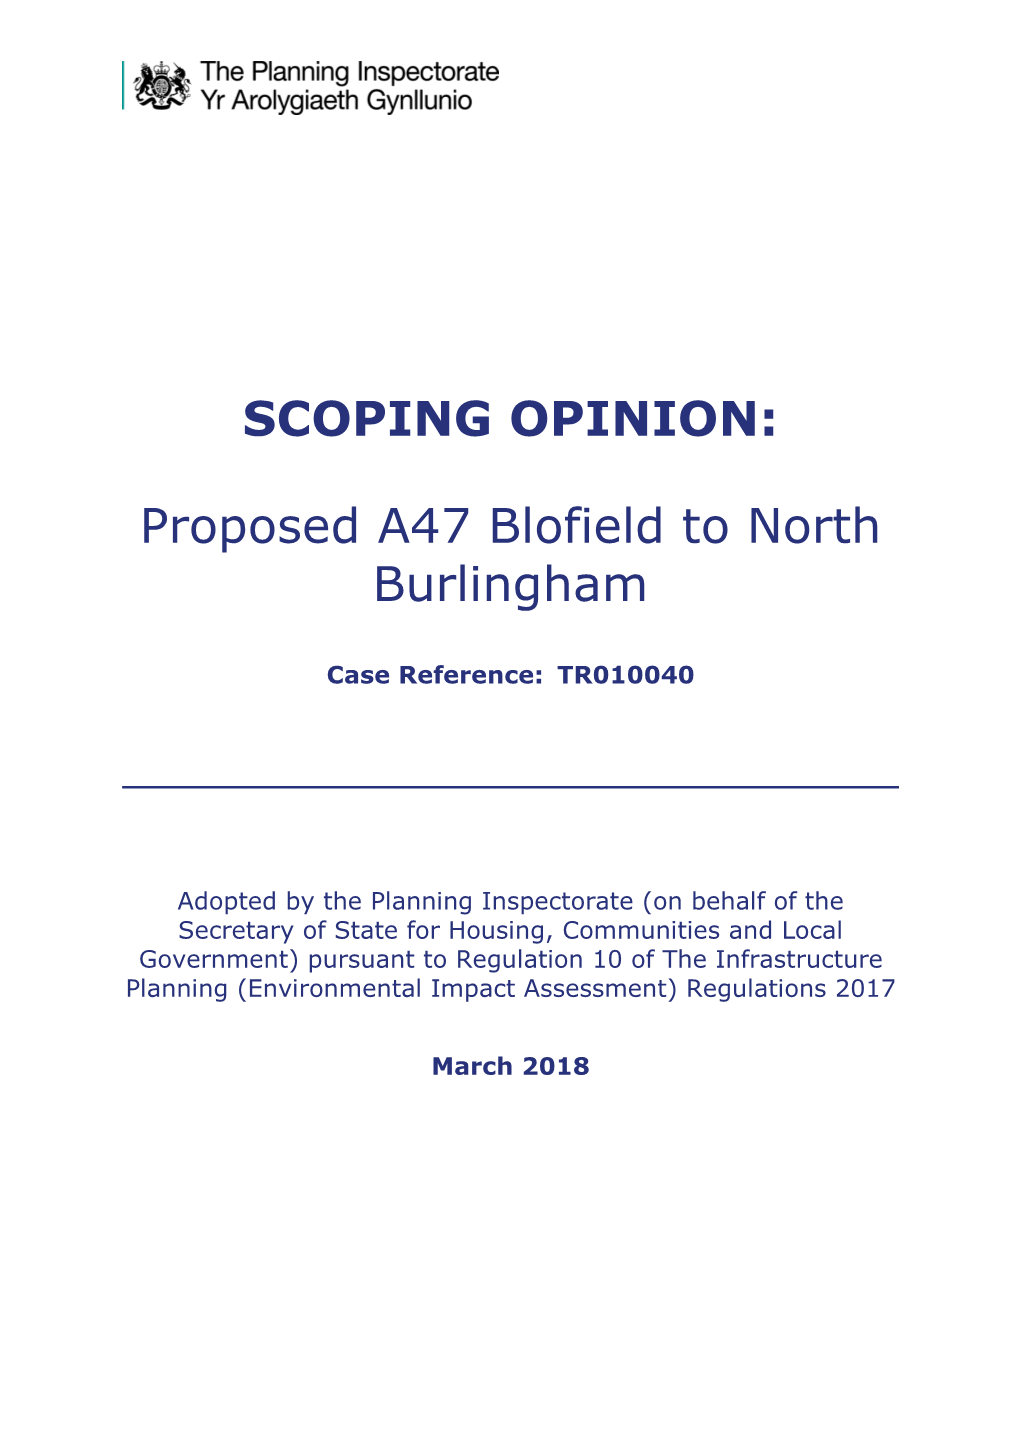 SCOPING OPINION: Proposed A47 Blofield to North Burlingham